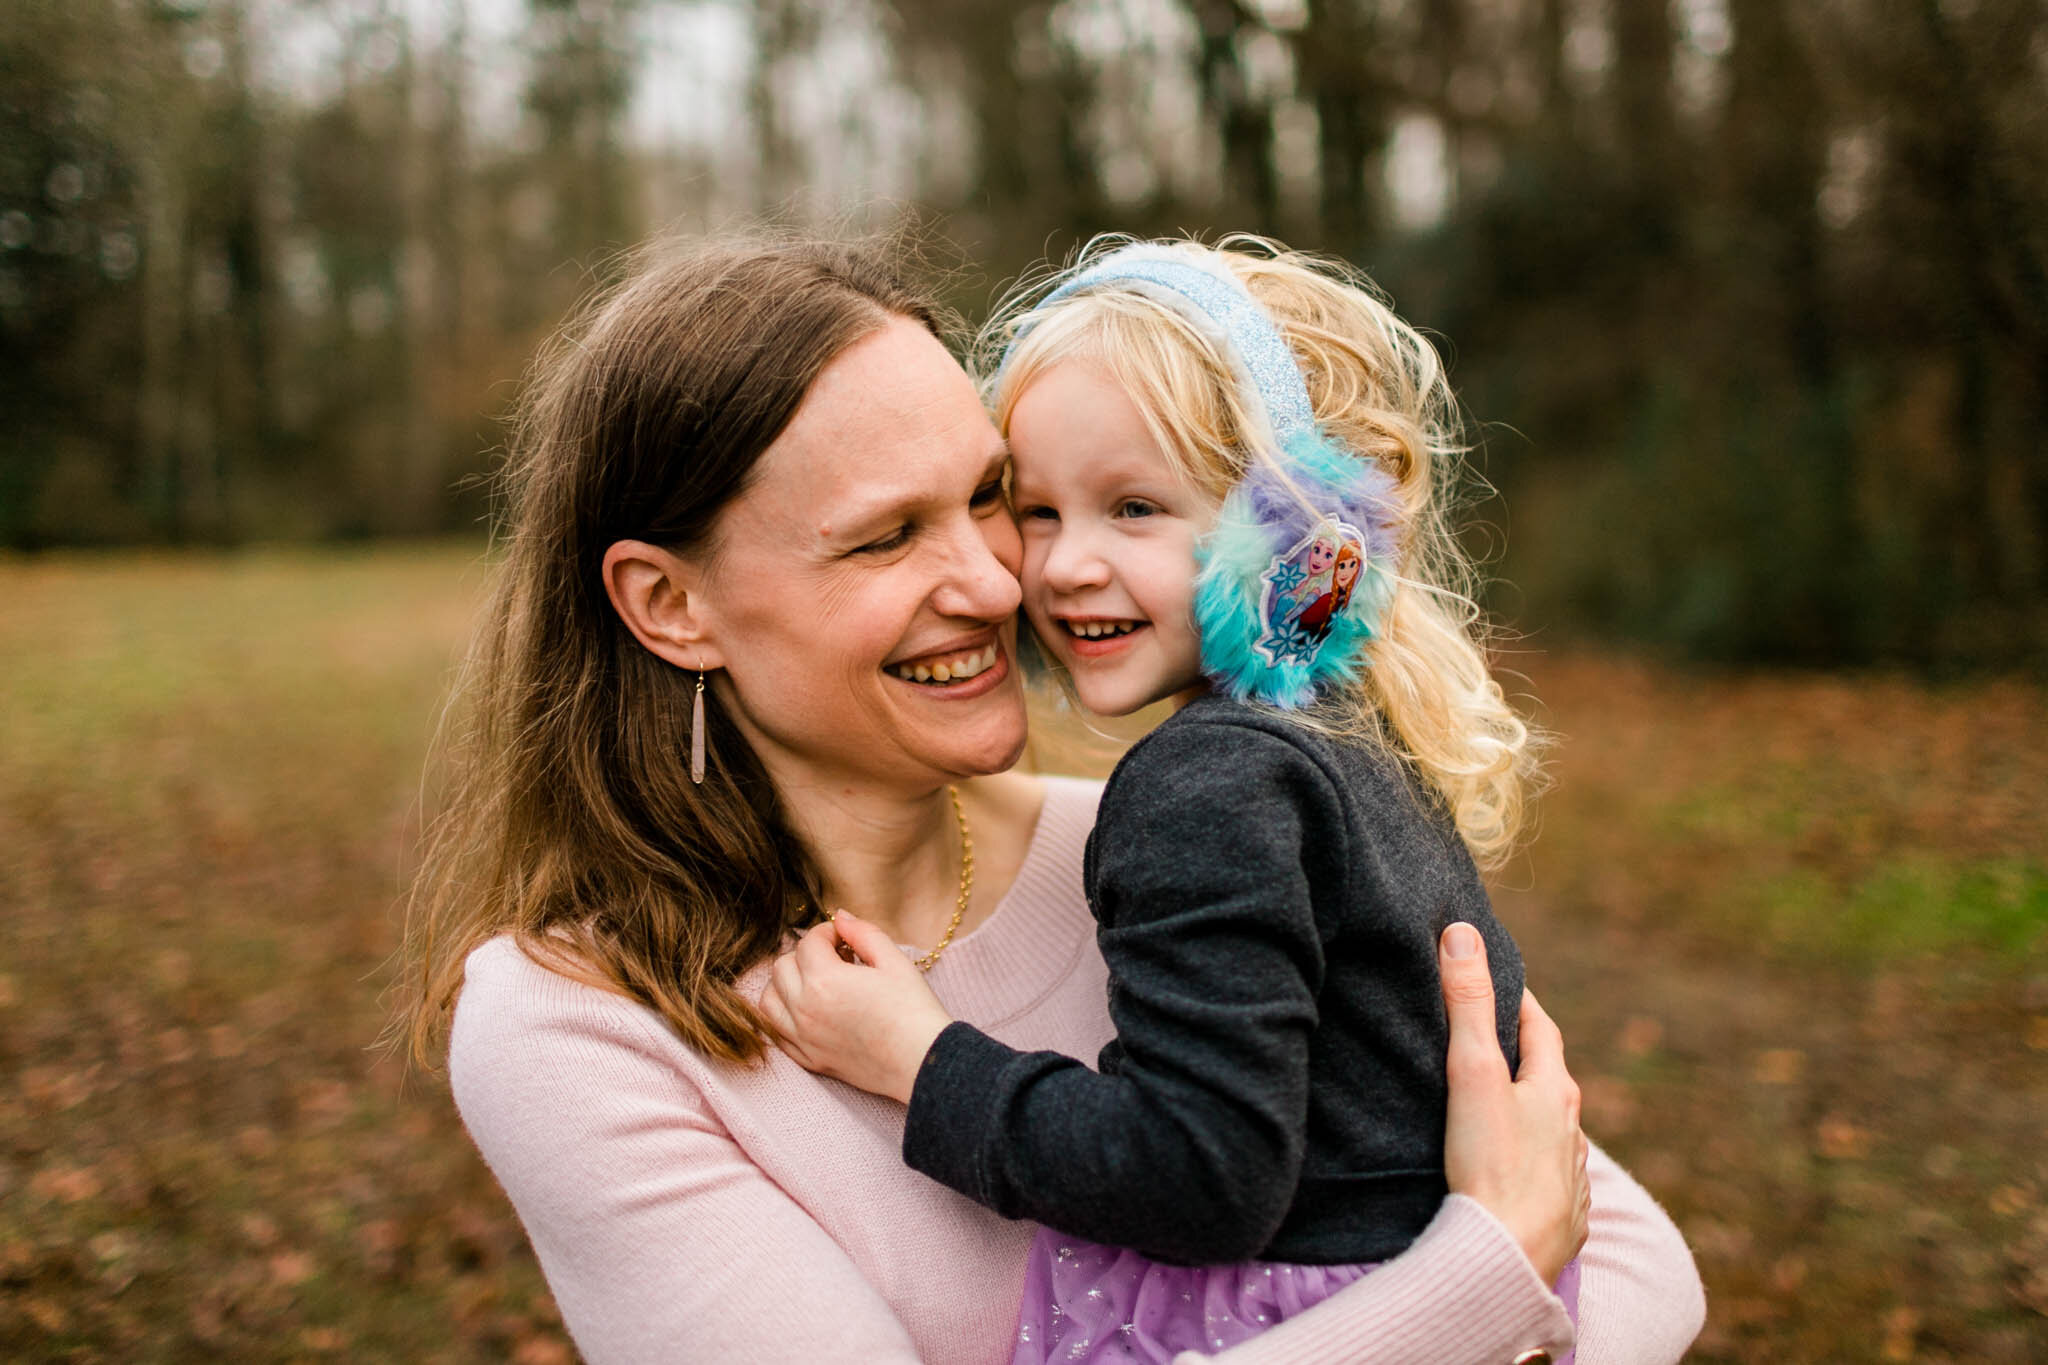 Durham Family Photographer | By G. Lin Photography | Mother and young daughter in her arms